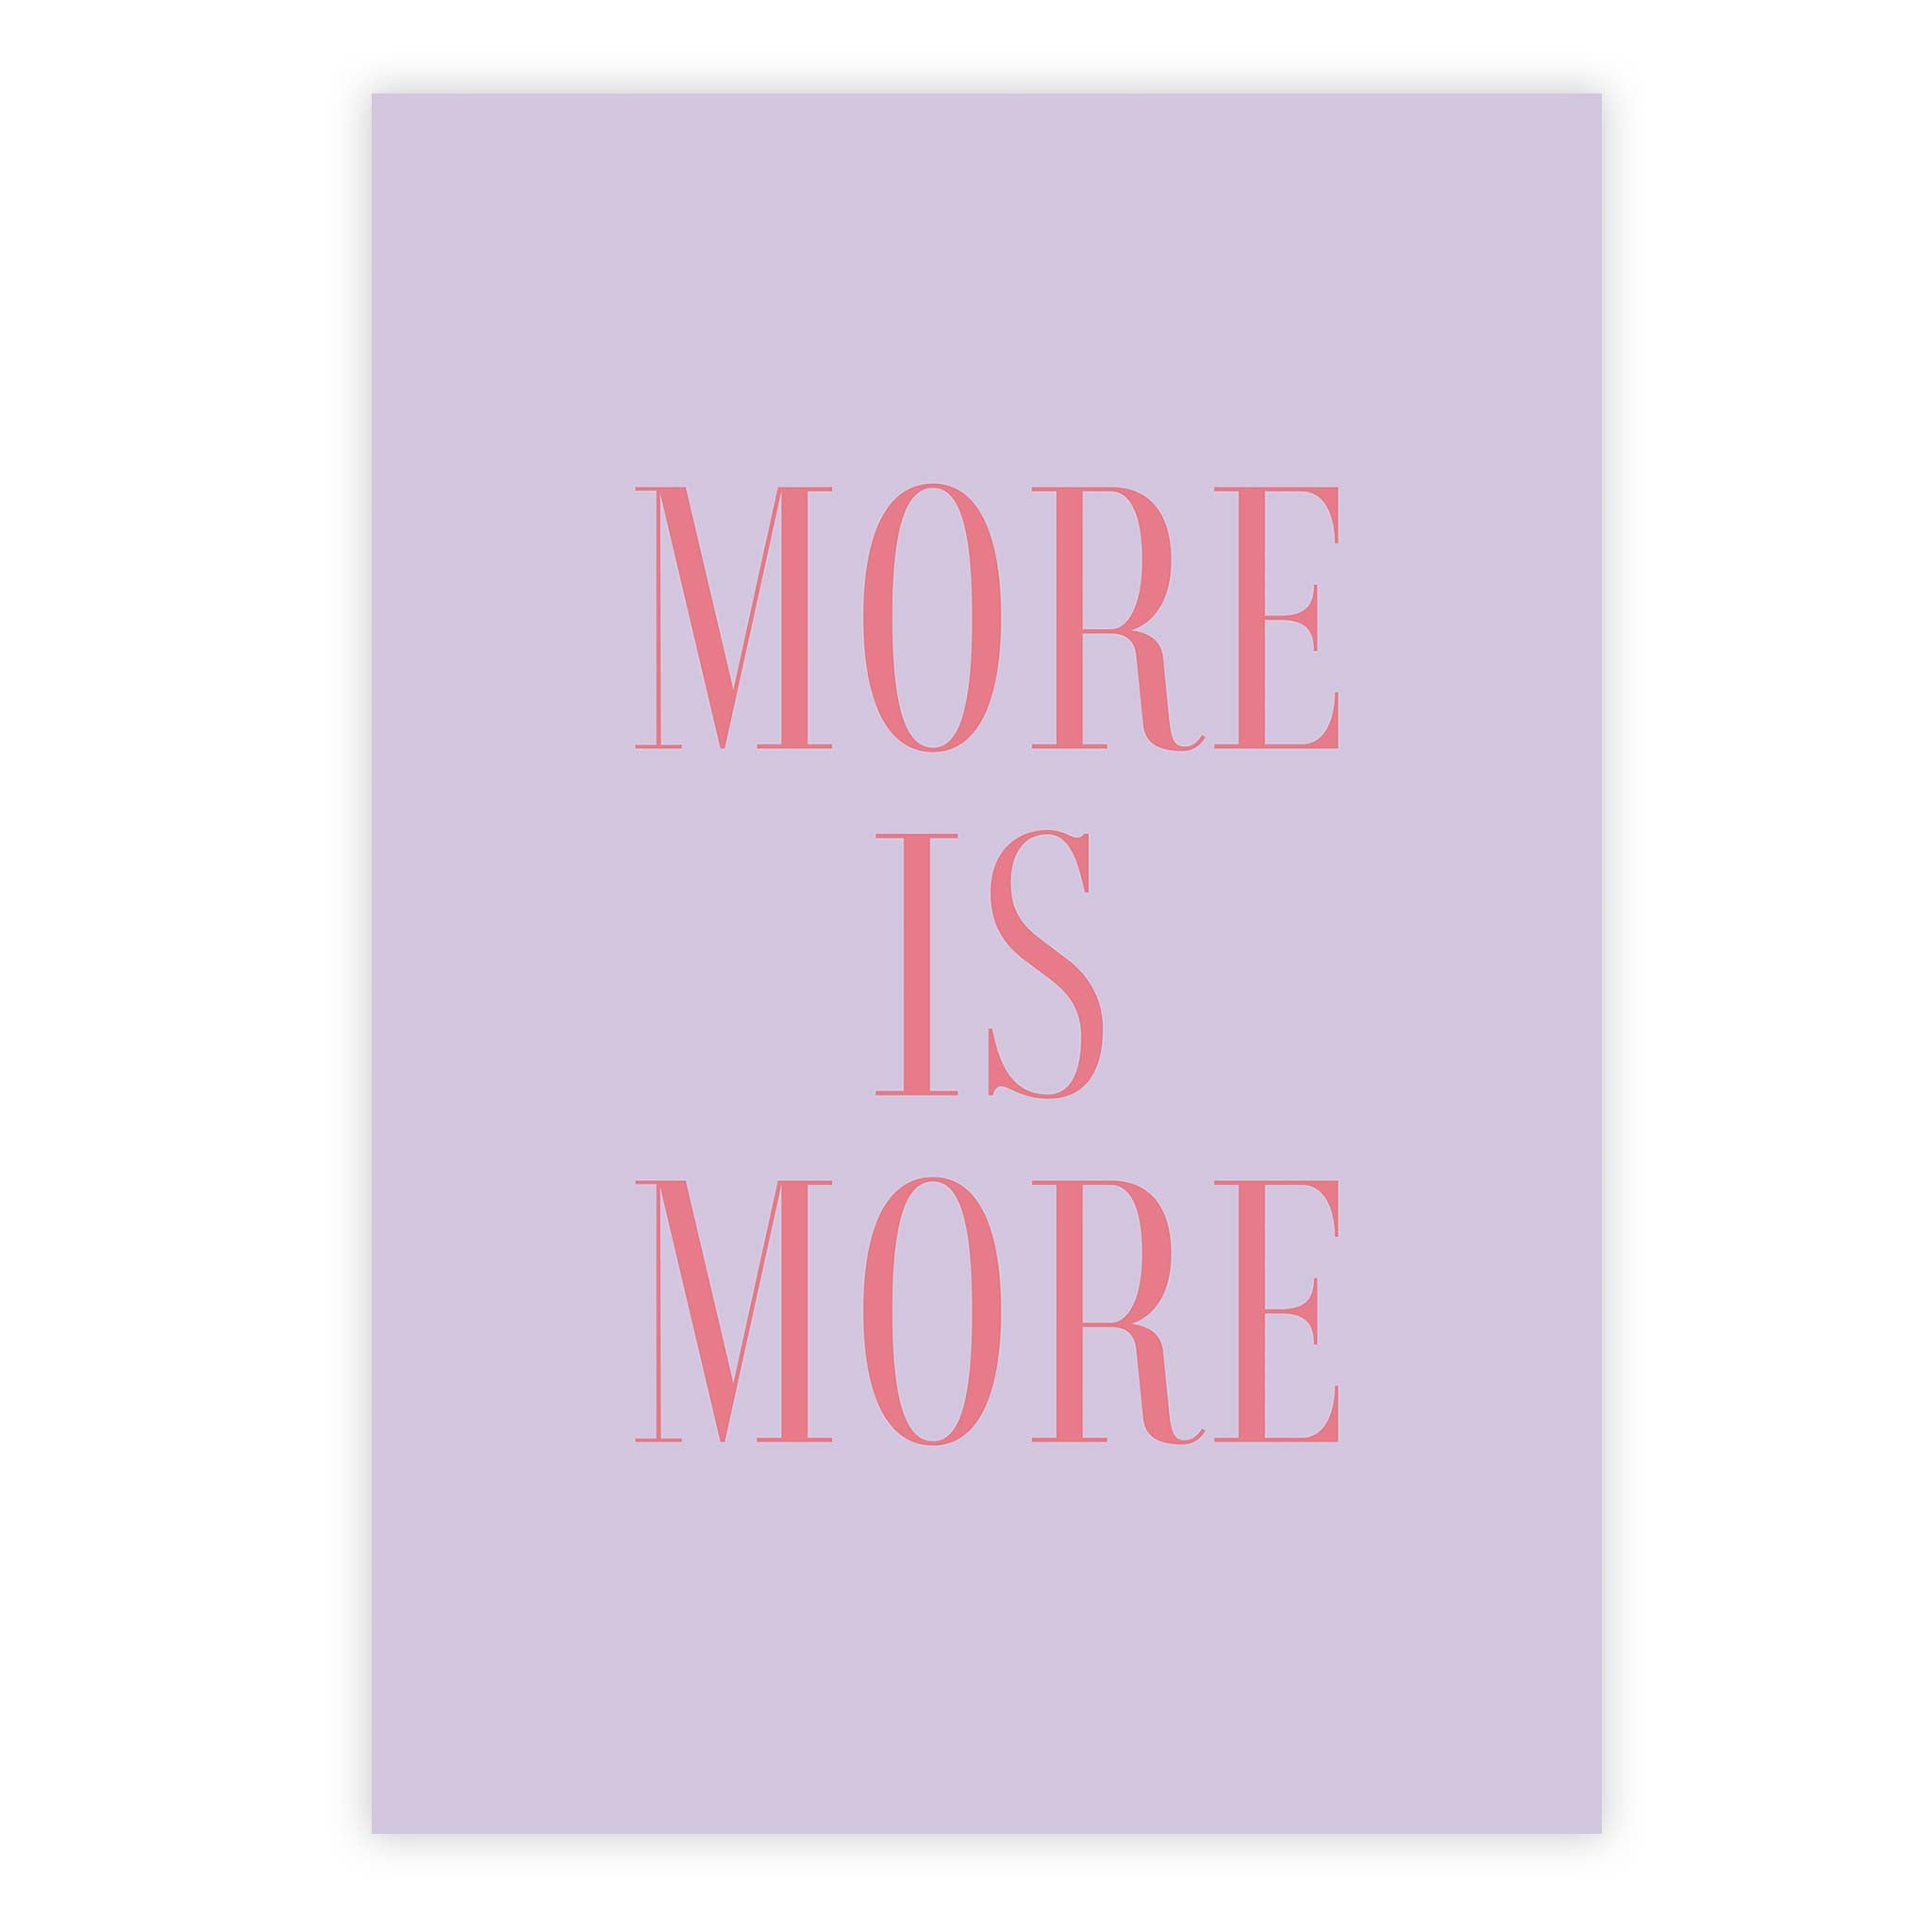 More is more